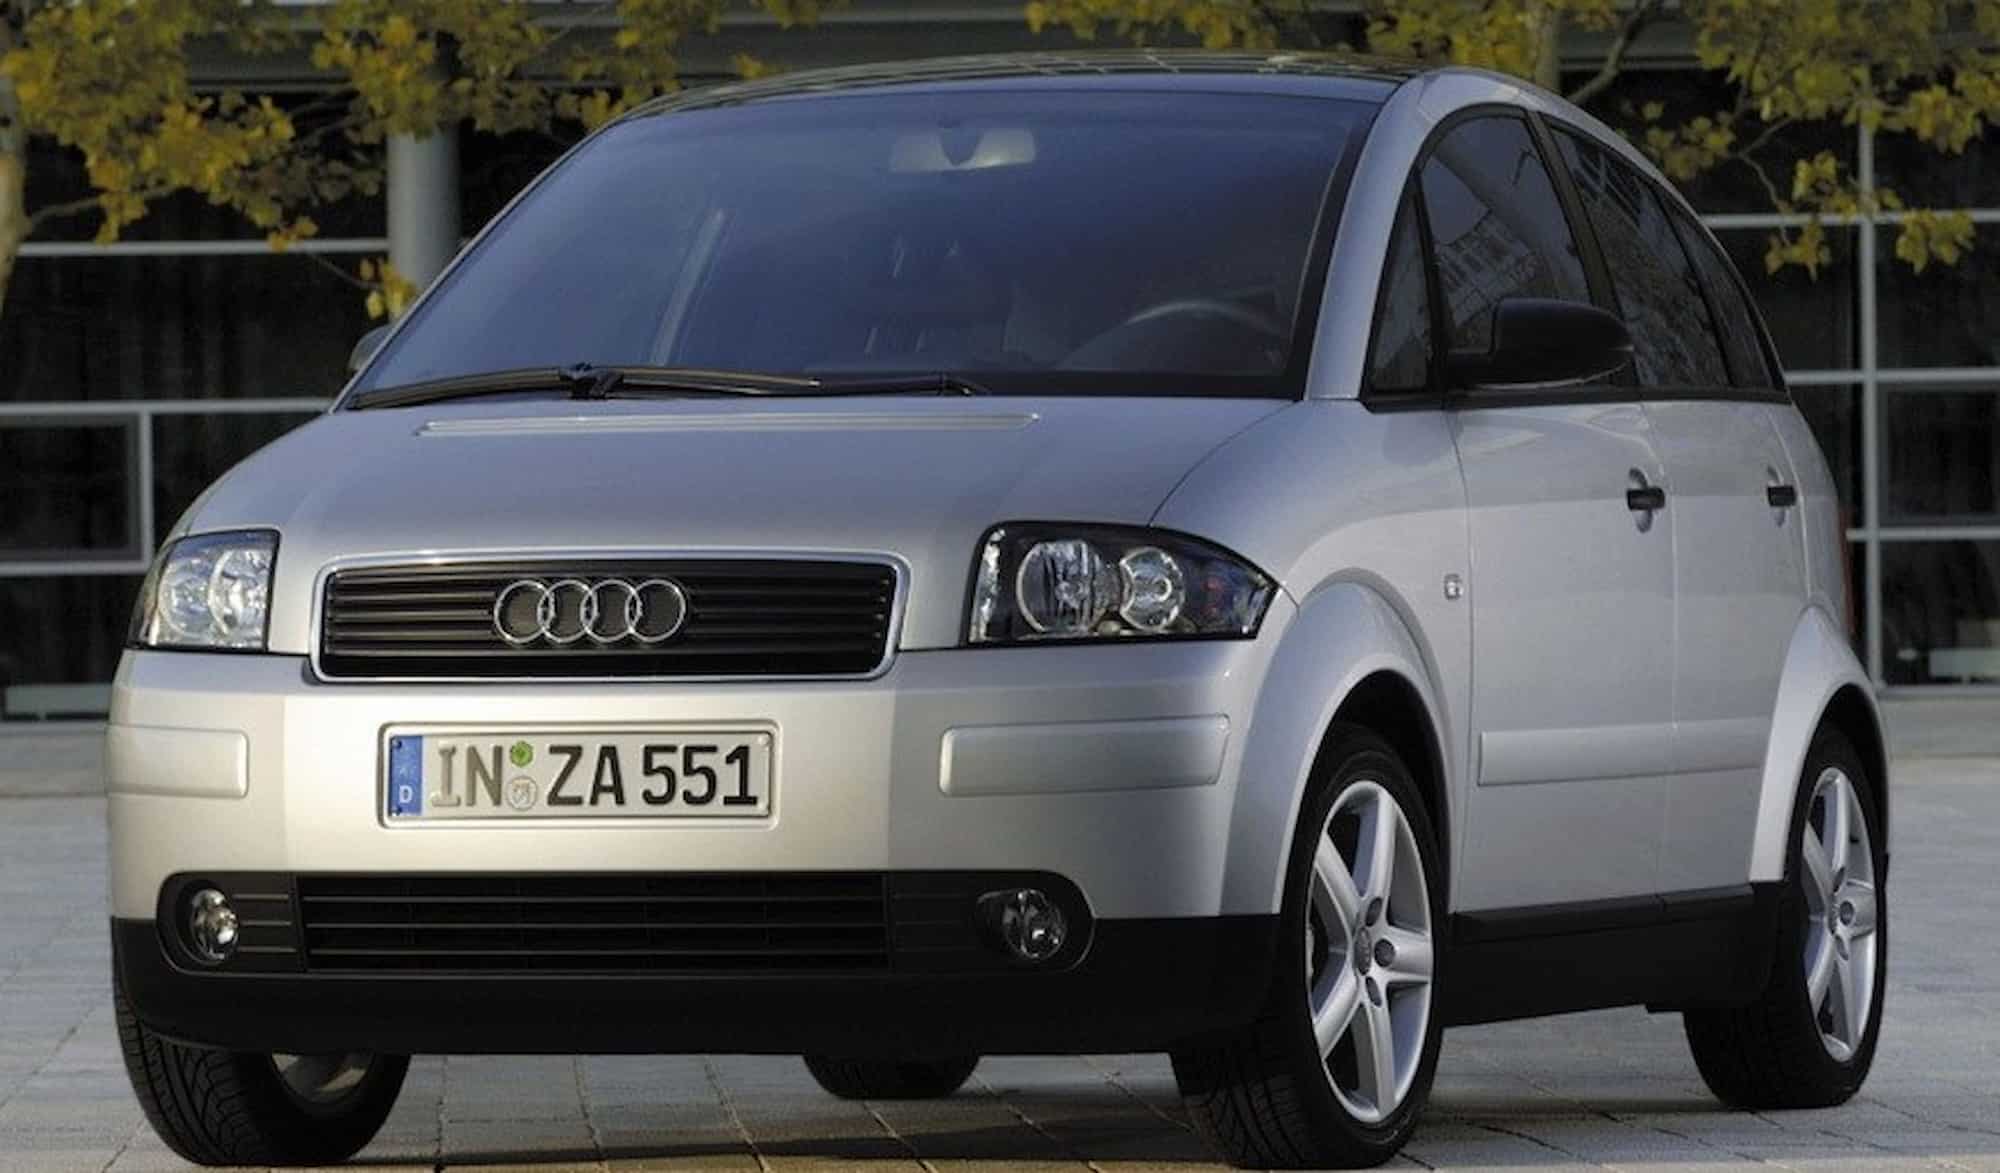 new audi a2 sends digital e tron vibes could it succeed where the old minivan failed 5